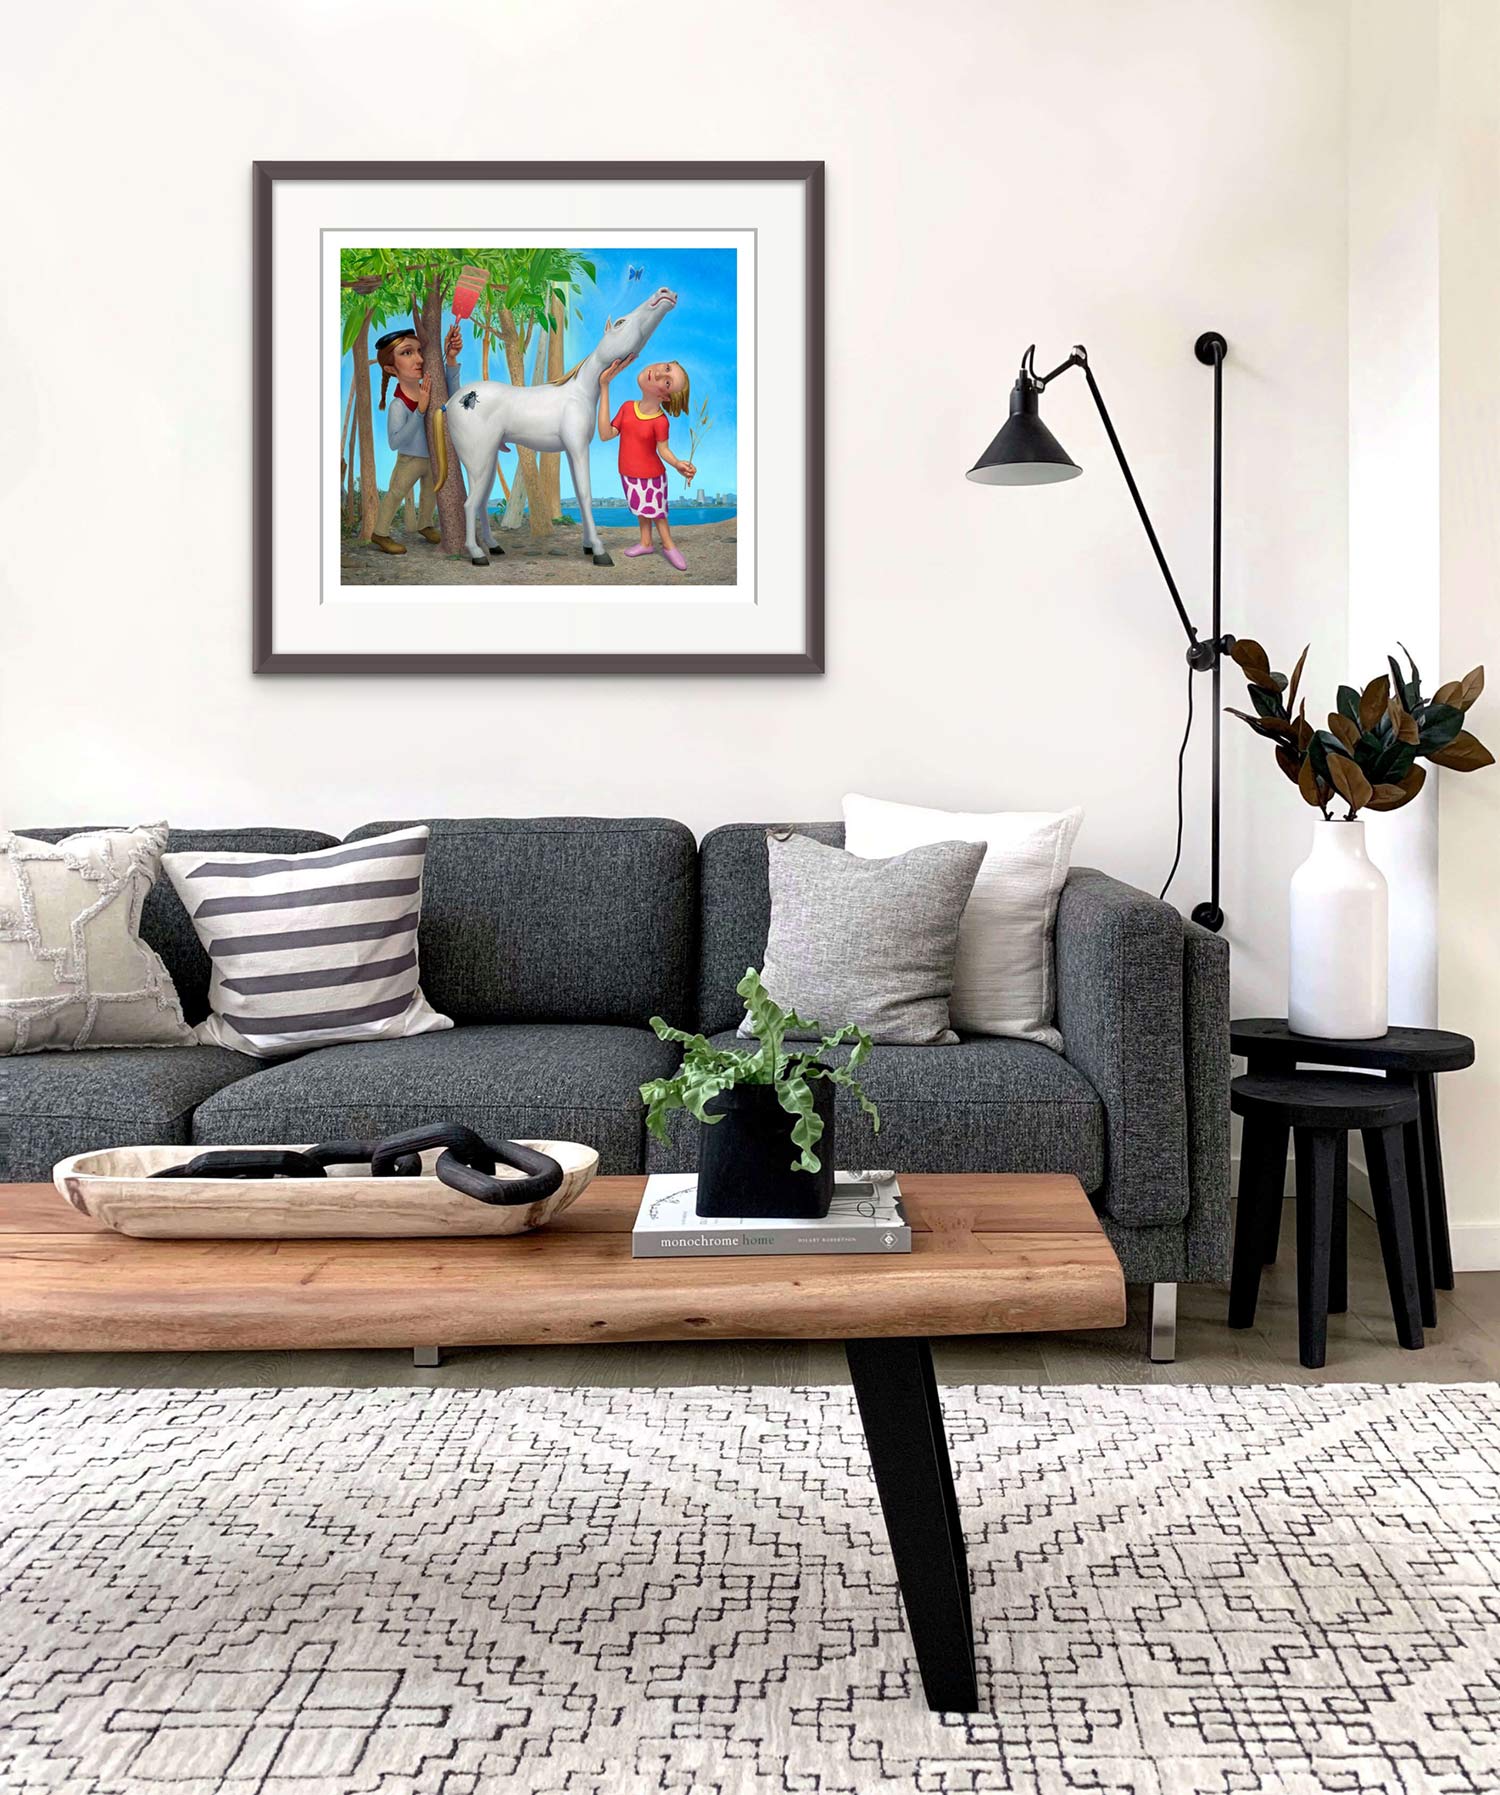 'White Pony Swat' medium fine art print in a living room, interior decoration in the style of casual modern chic monochrome